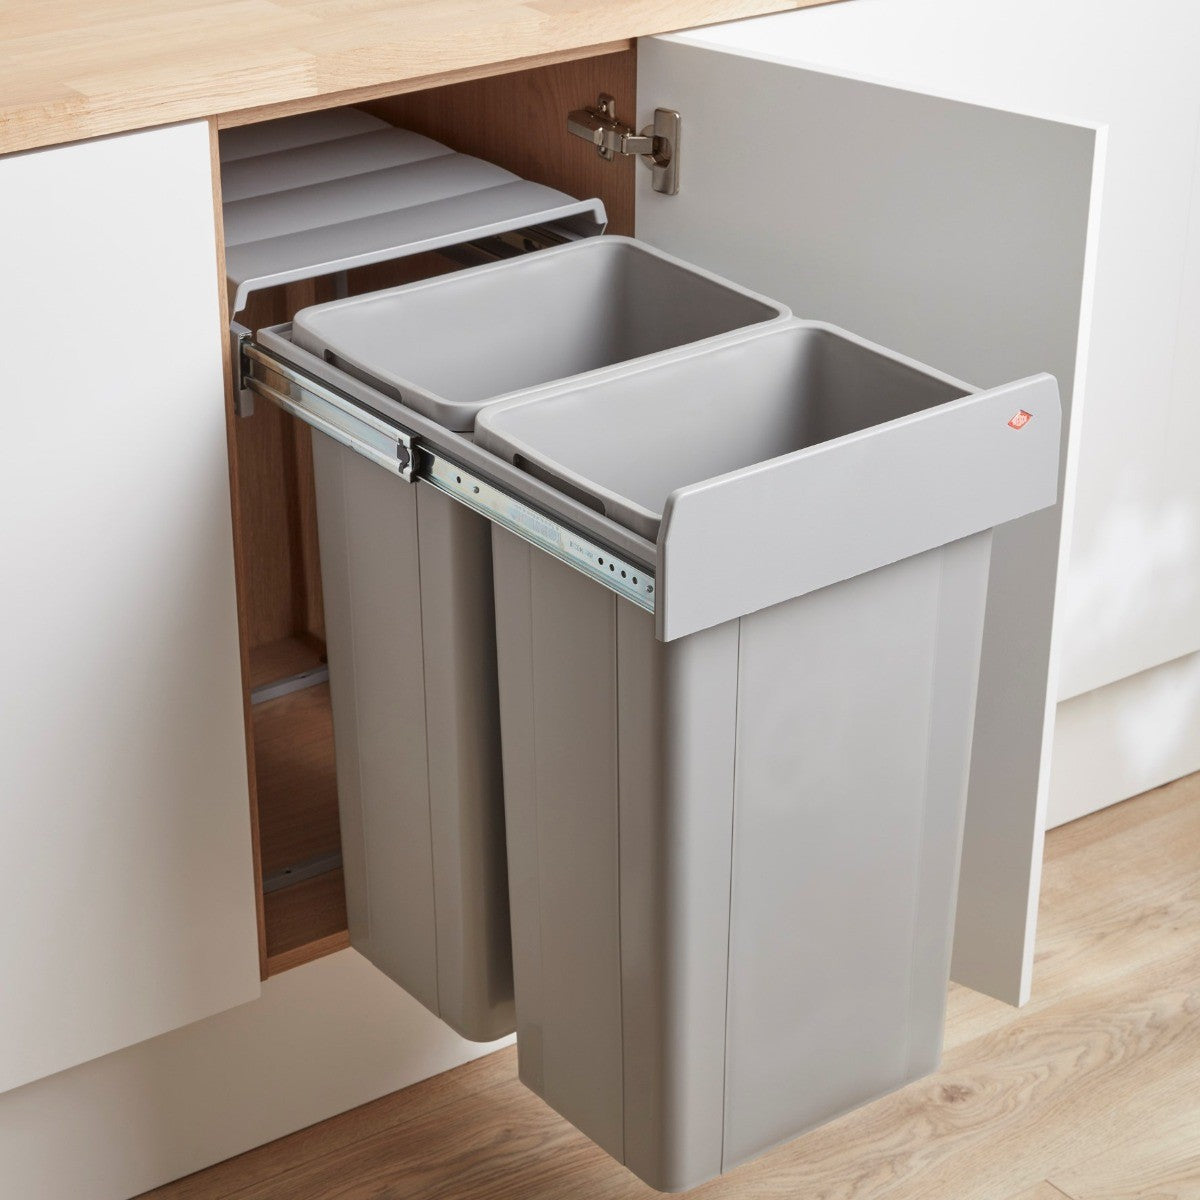 280Gy Gollinucci Pull out waste bin perfect for under sink units, modern  grey finish